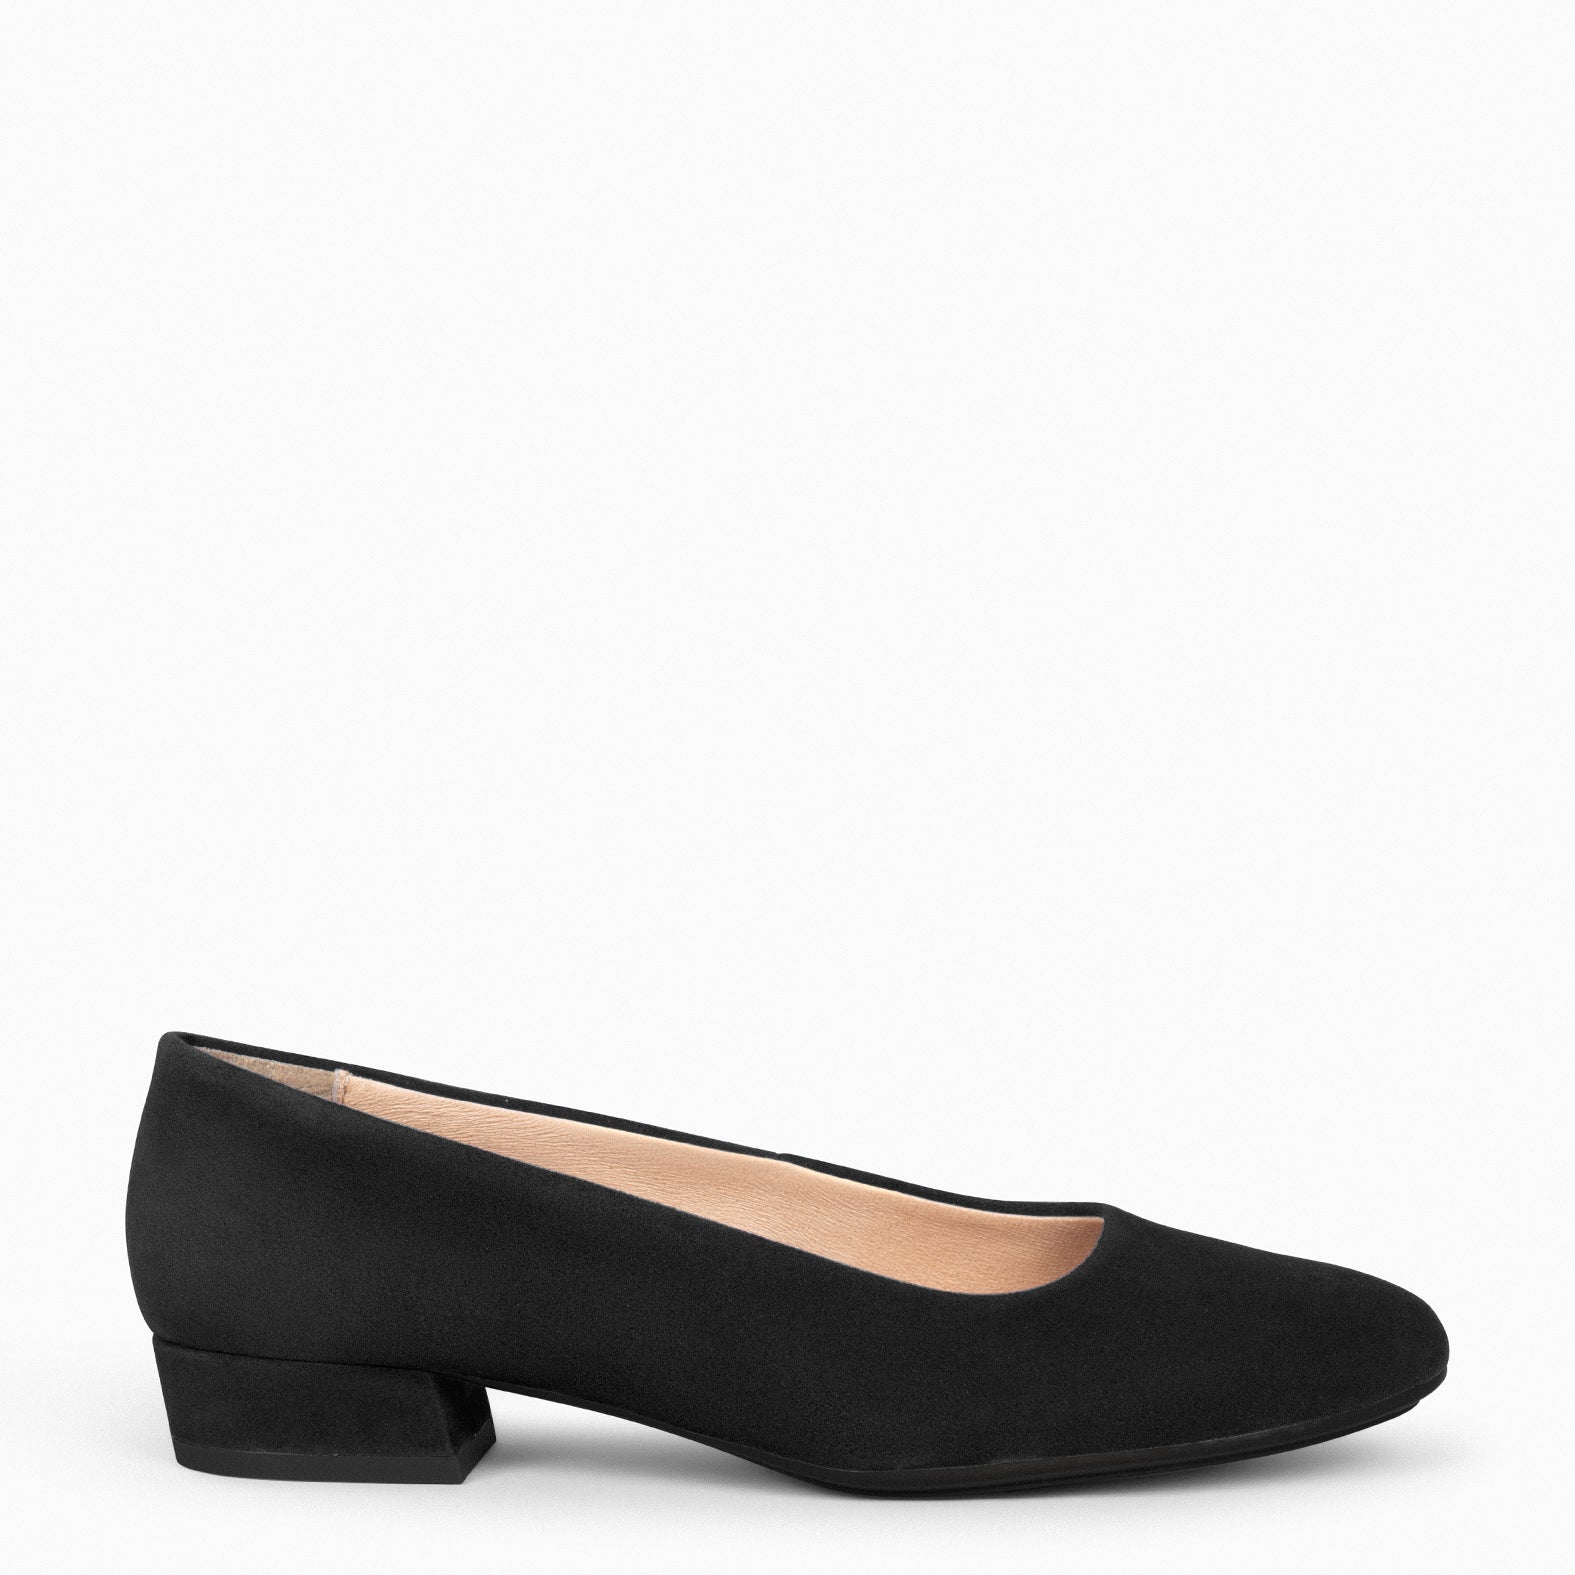 URBAN XS –  BLACK  low-heeled suede shoes